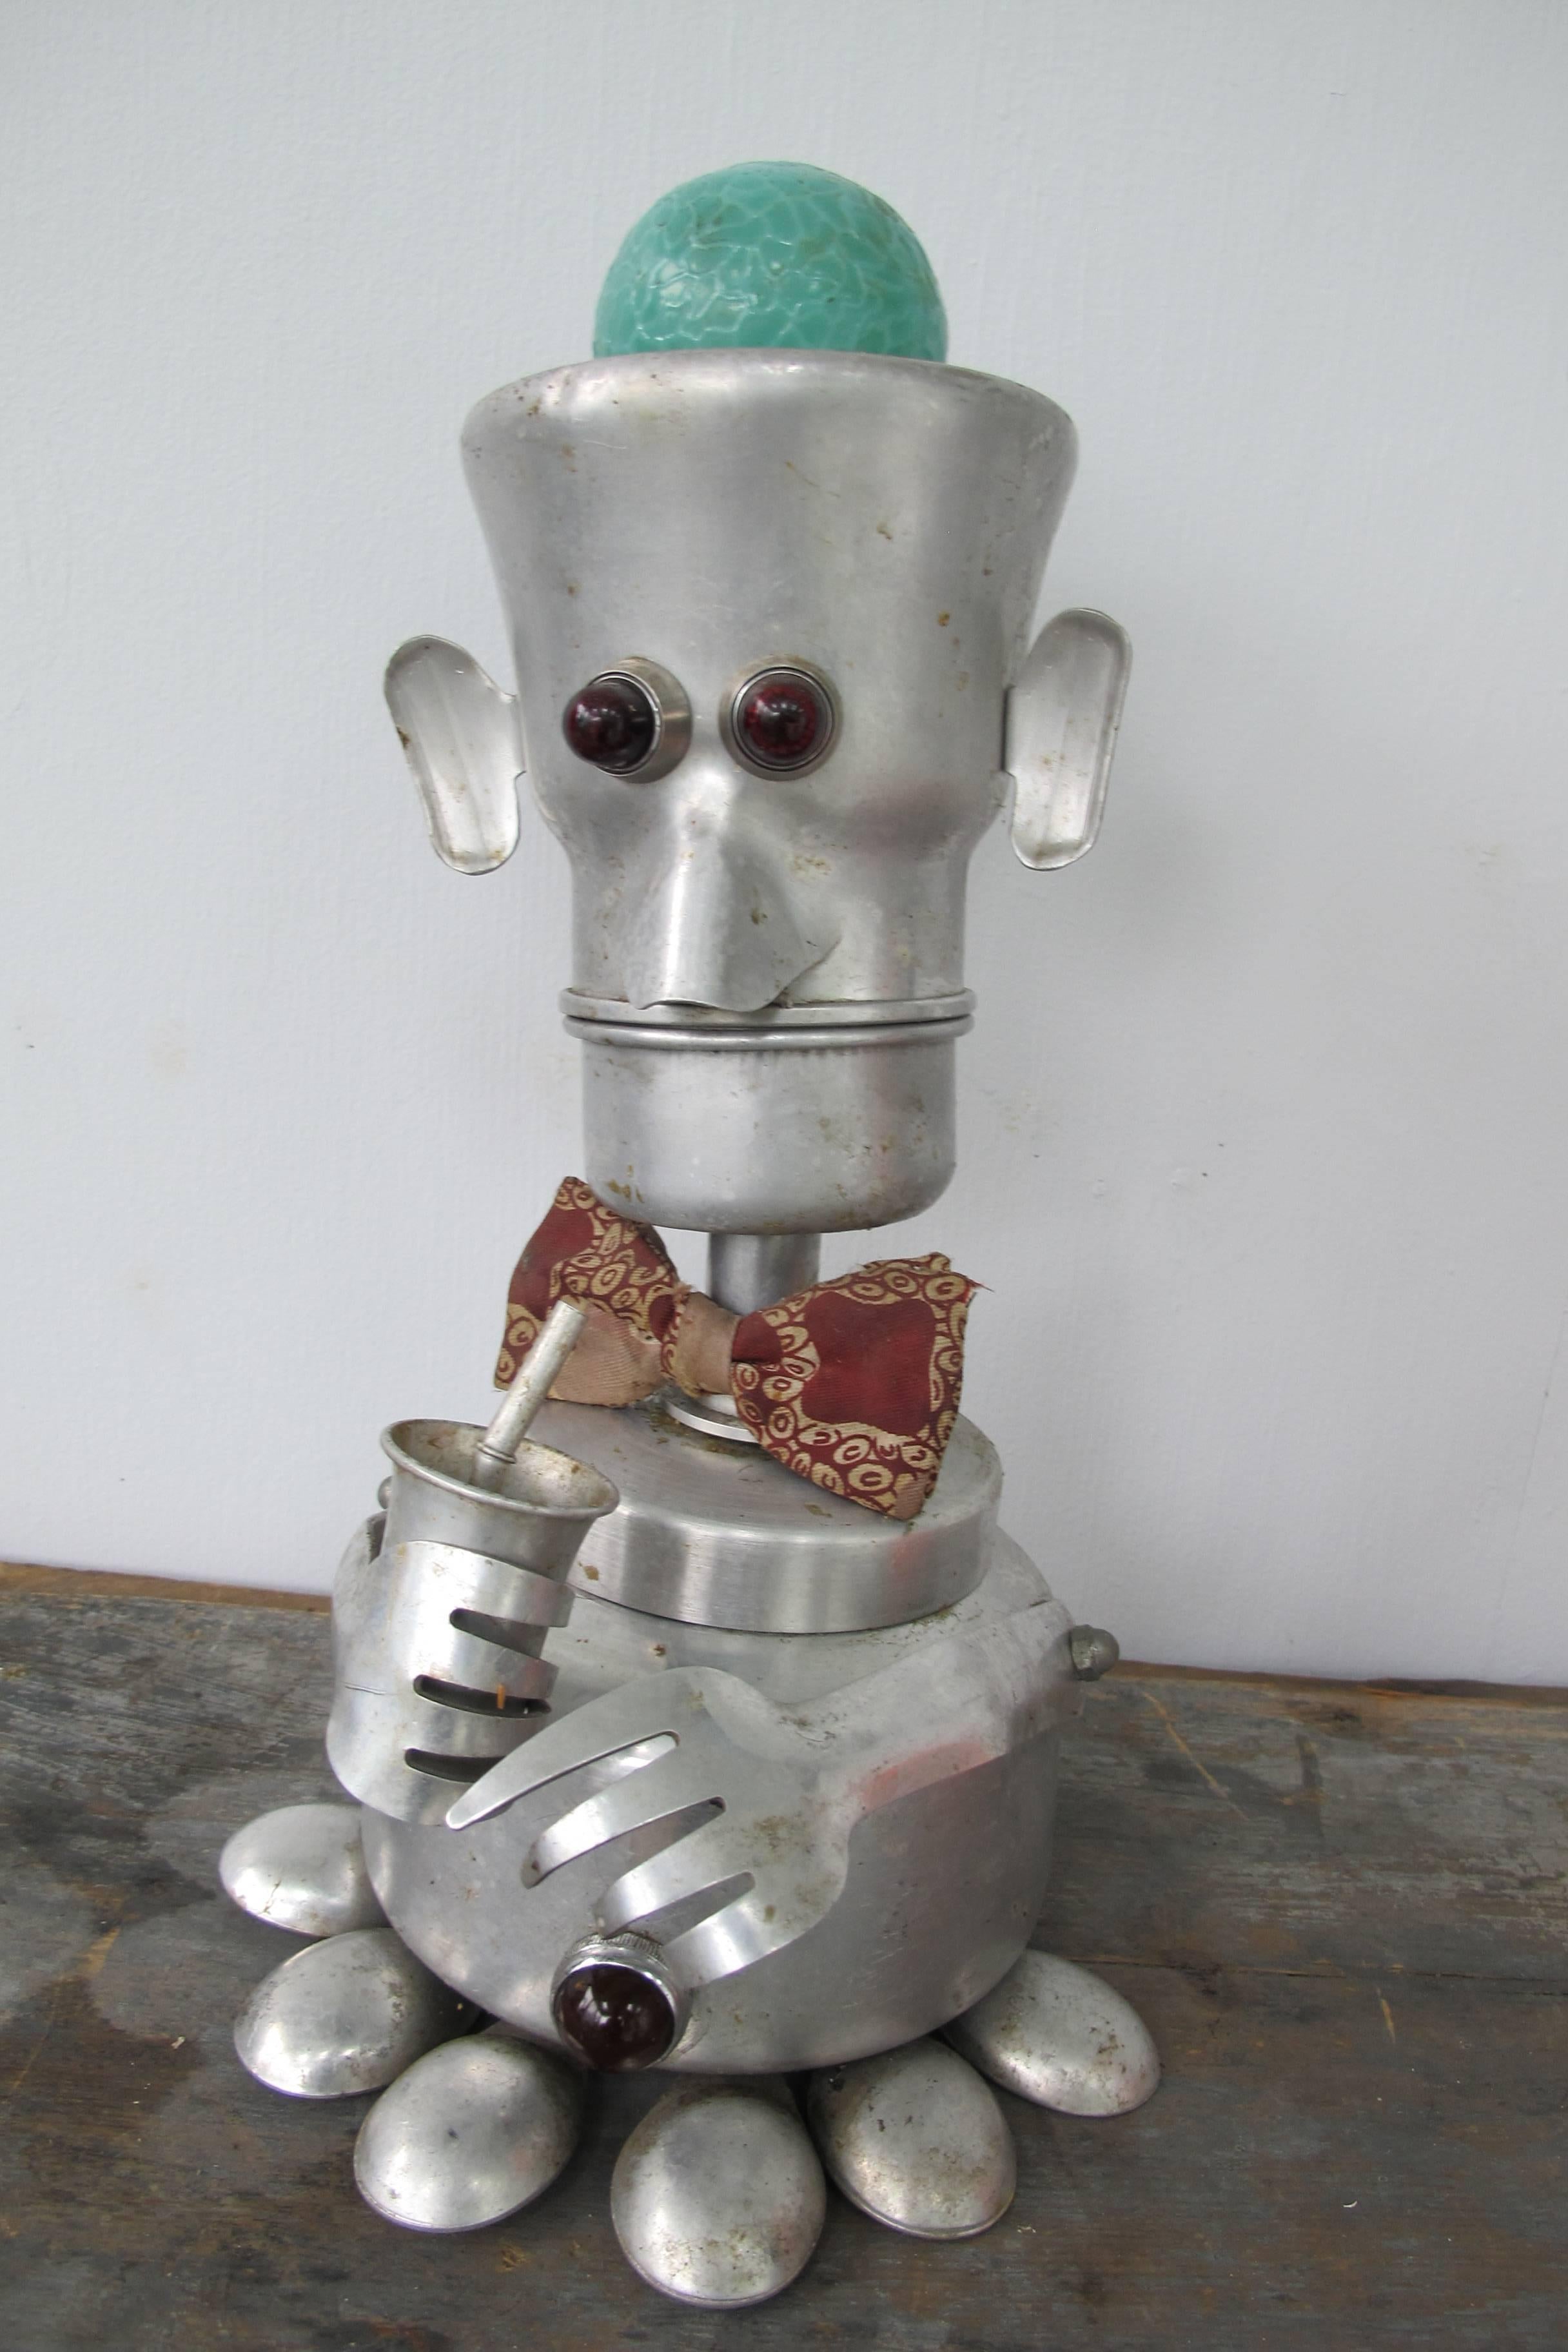 Jim Bauer has collected aluminium kitchenware for years and he assembles art pieces putting together fanciful assemblages. This figure incorporating a vintage coffee pot has colored lights that can be turned on by a switch in the back.